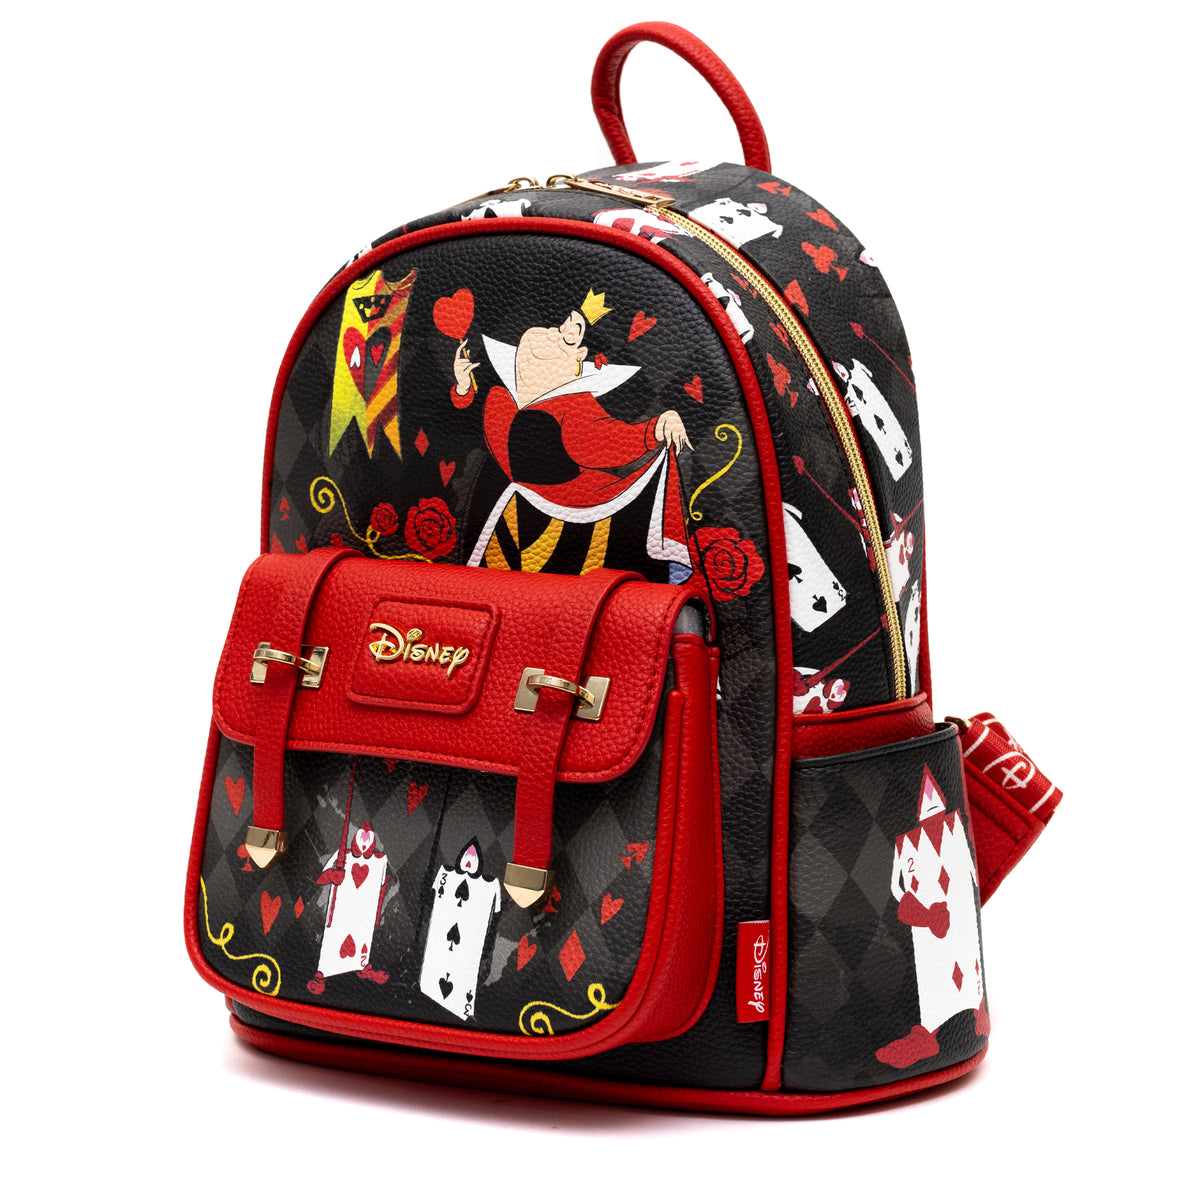 WondaPOP LUXE - Disney Mini Backpack Villains Queen of Hearts Limited Edition